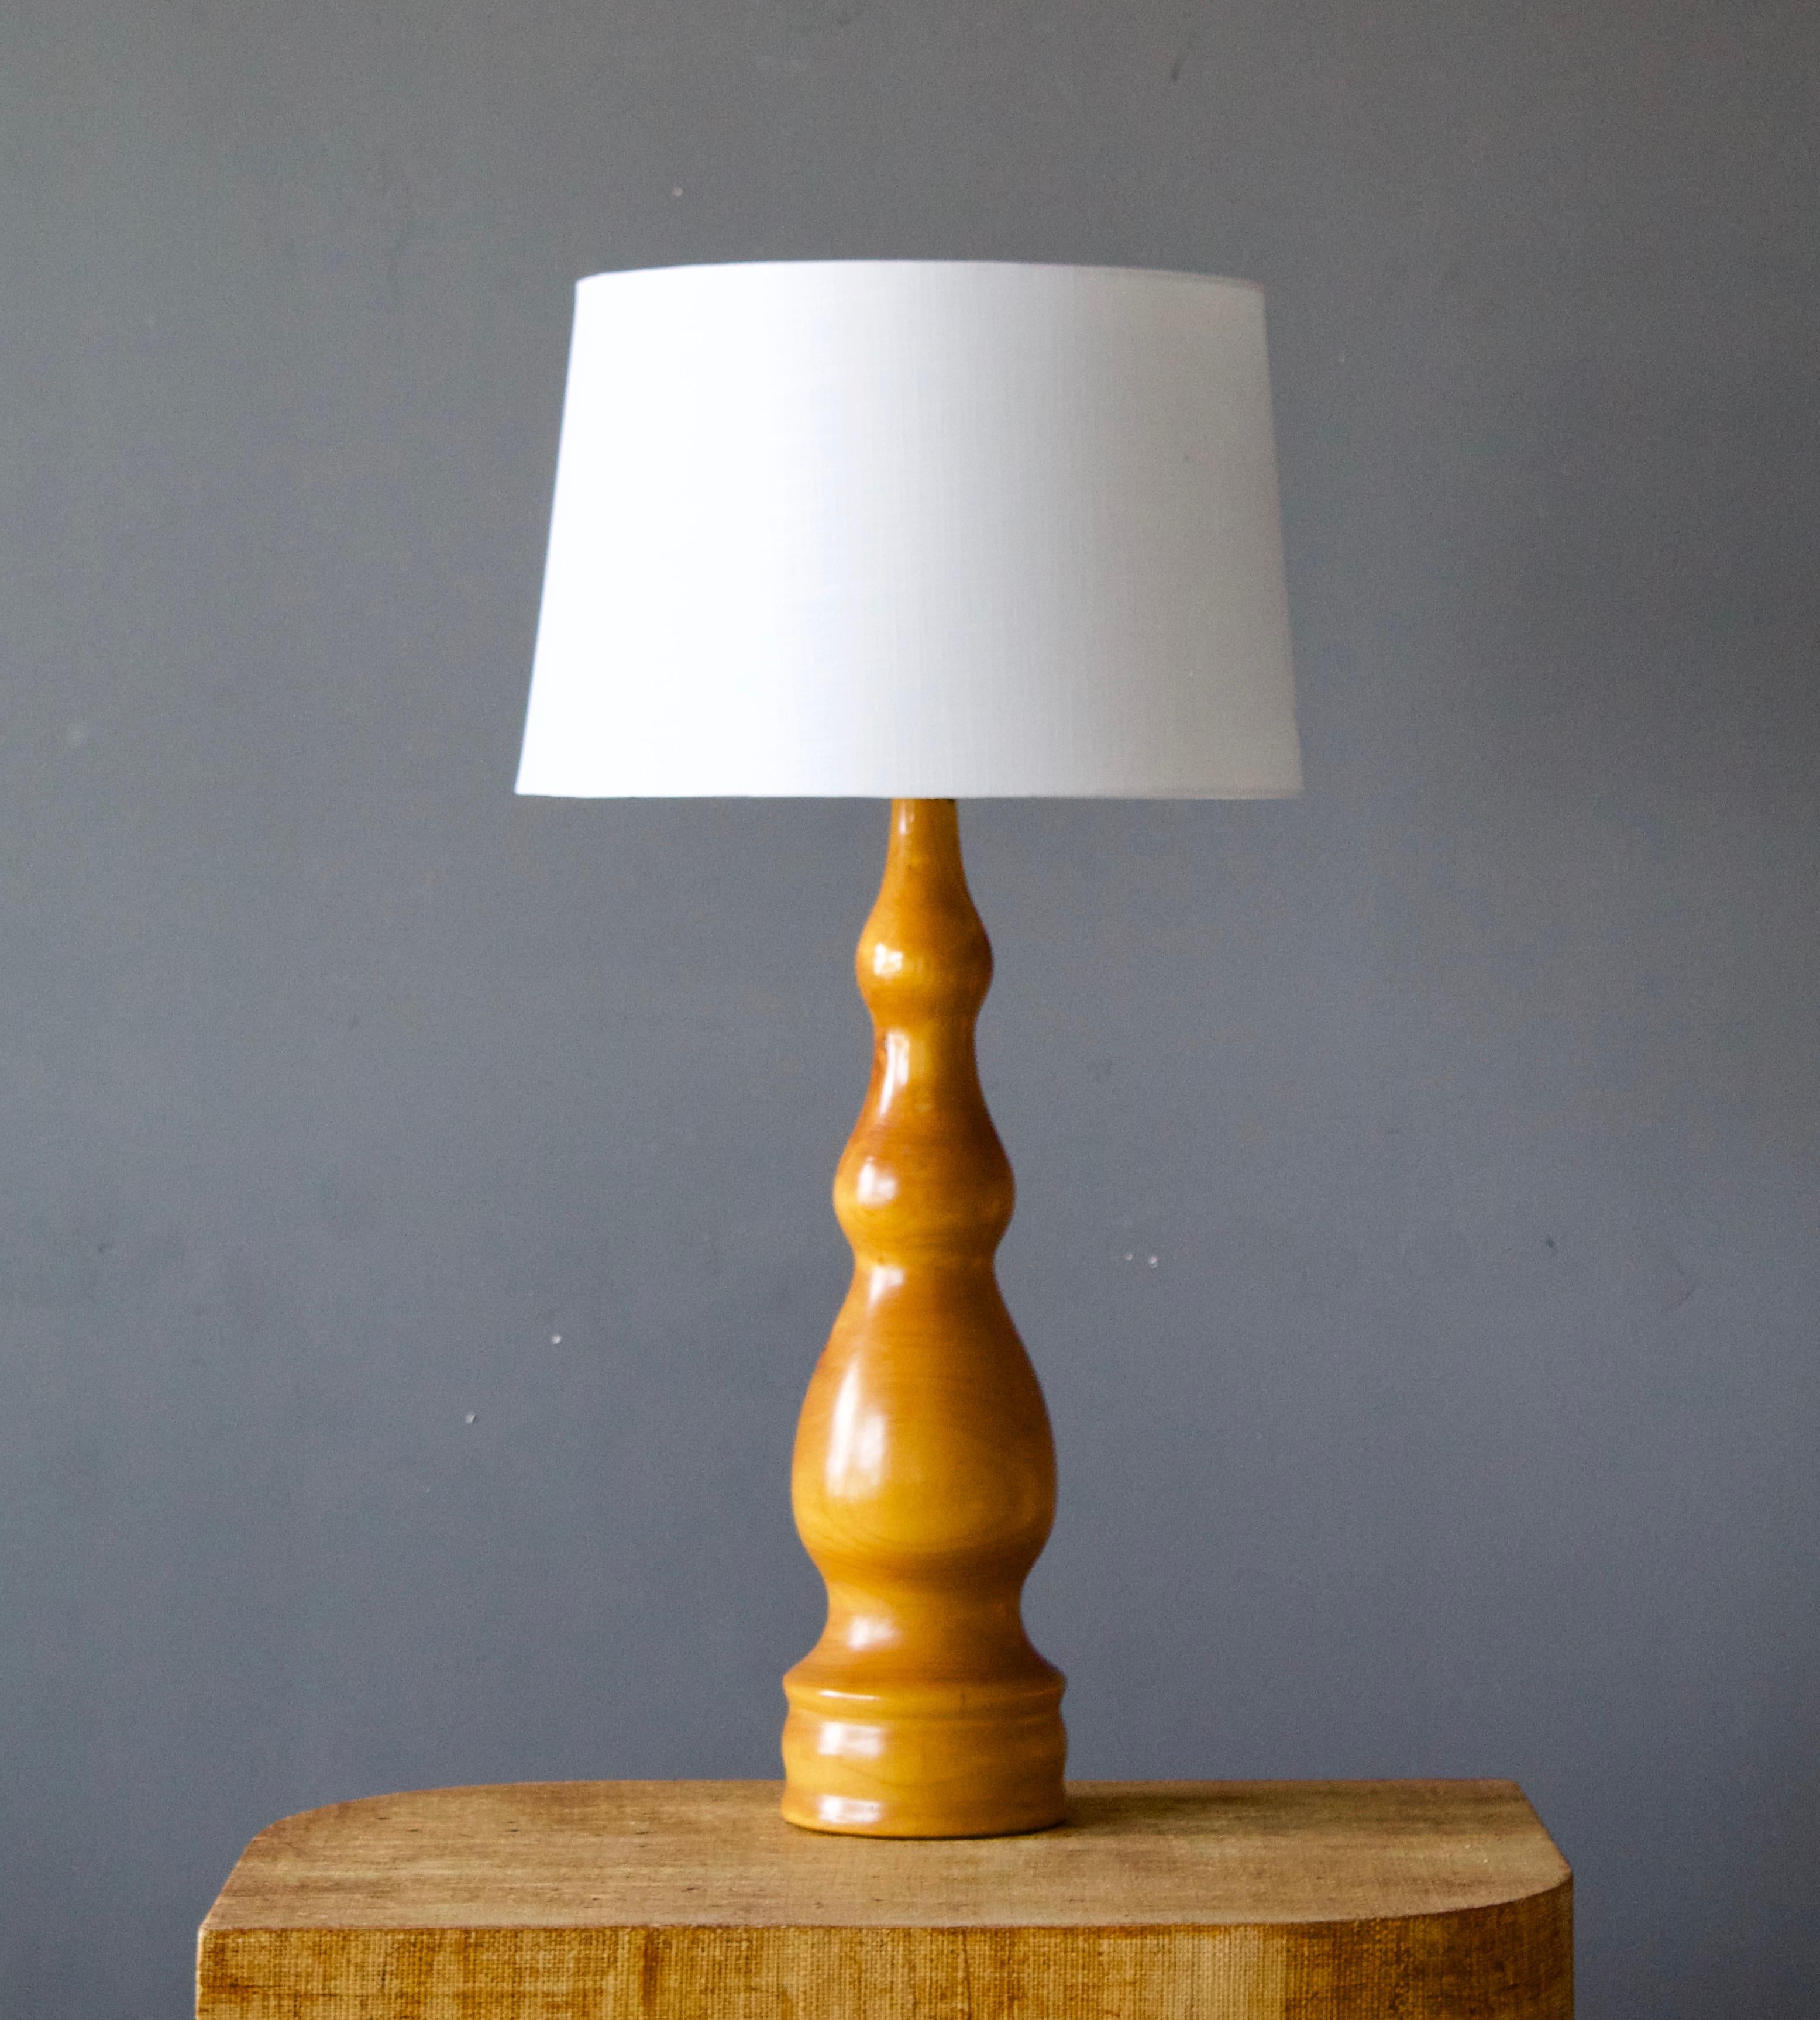 A table lamp. In hand-sculpted burl wood. By unknown studio craftsman.

Sold without lampshade. Stated dimensions excluding bulbs and lampshade.

Other designers of the period include Alexandre Knoll, George Nakashima, Isamu Noguchi, J.B. Blunk